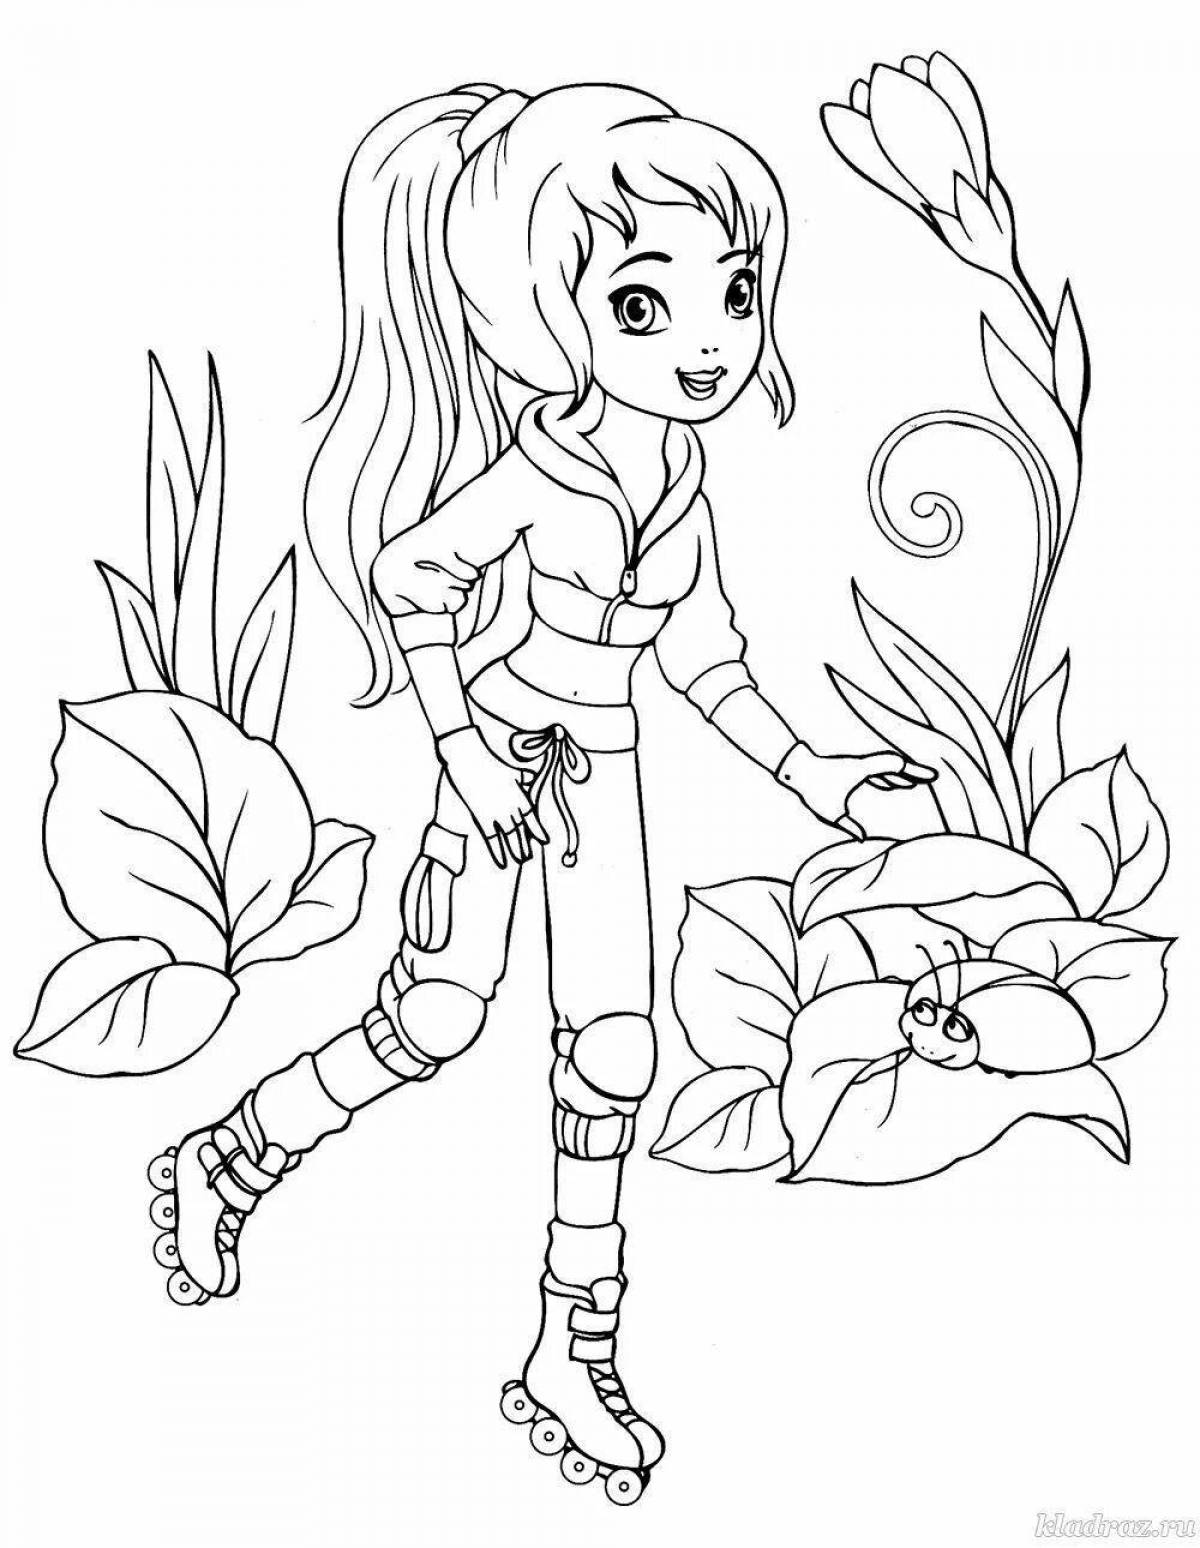 Amazing coloring page 6 for girls